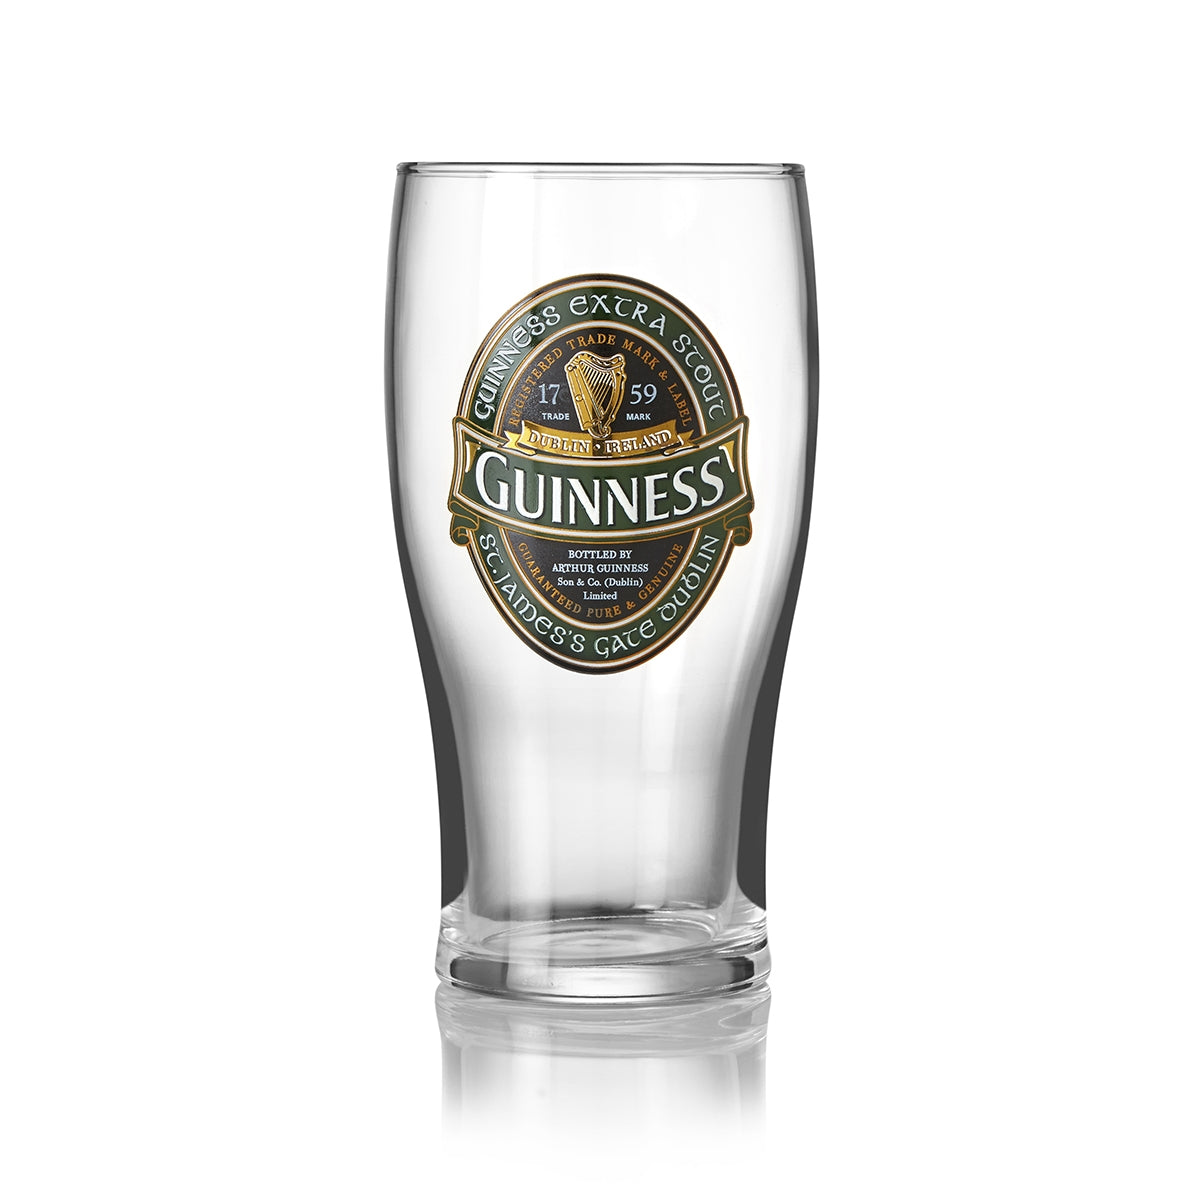 Description: Authentic Guinness Ireland Collection Pint Glass - 2 Pack imported from Ireland. Perfect for enjoying a classic pint of Guinness in style.